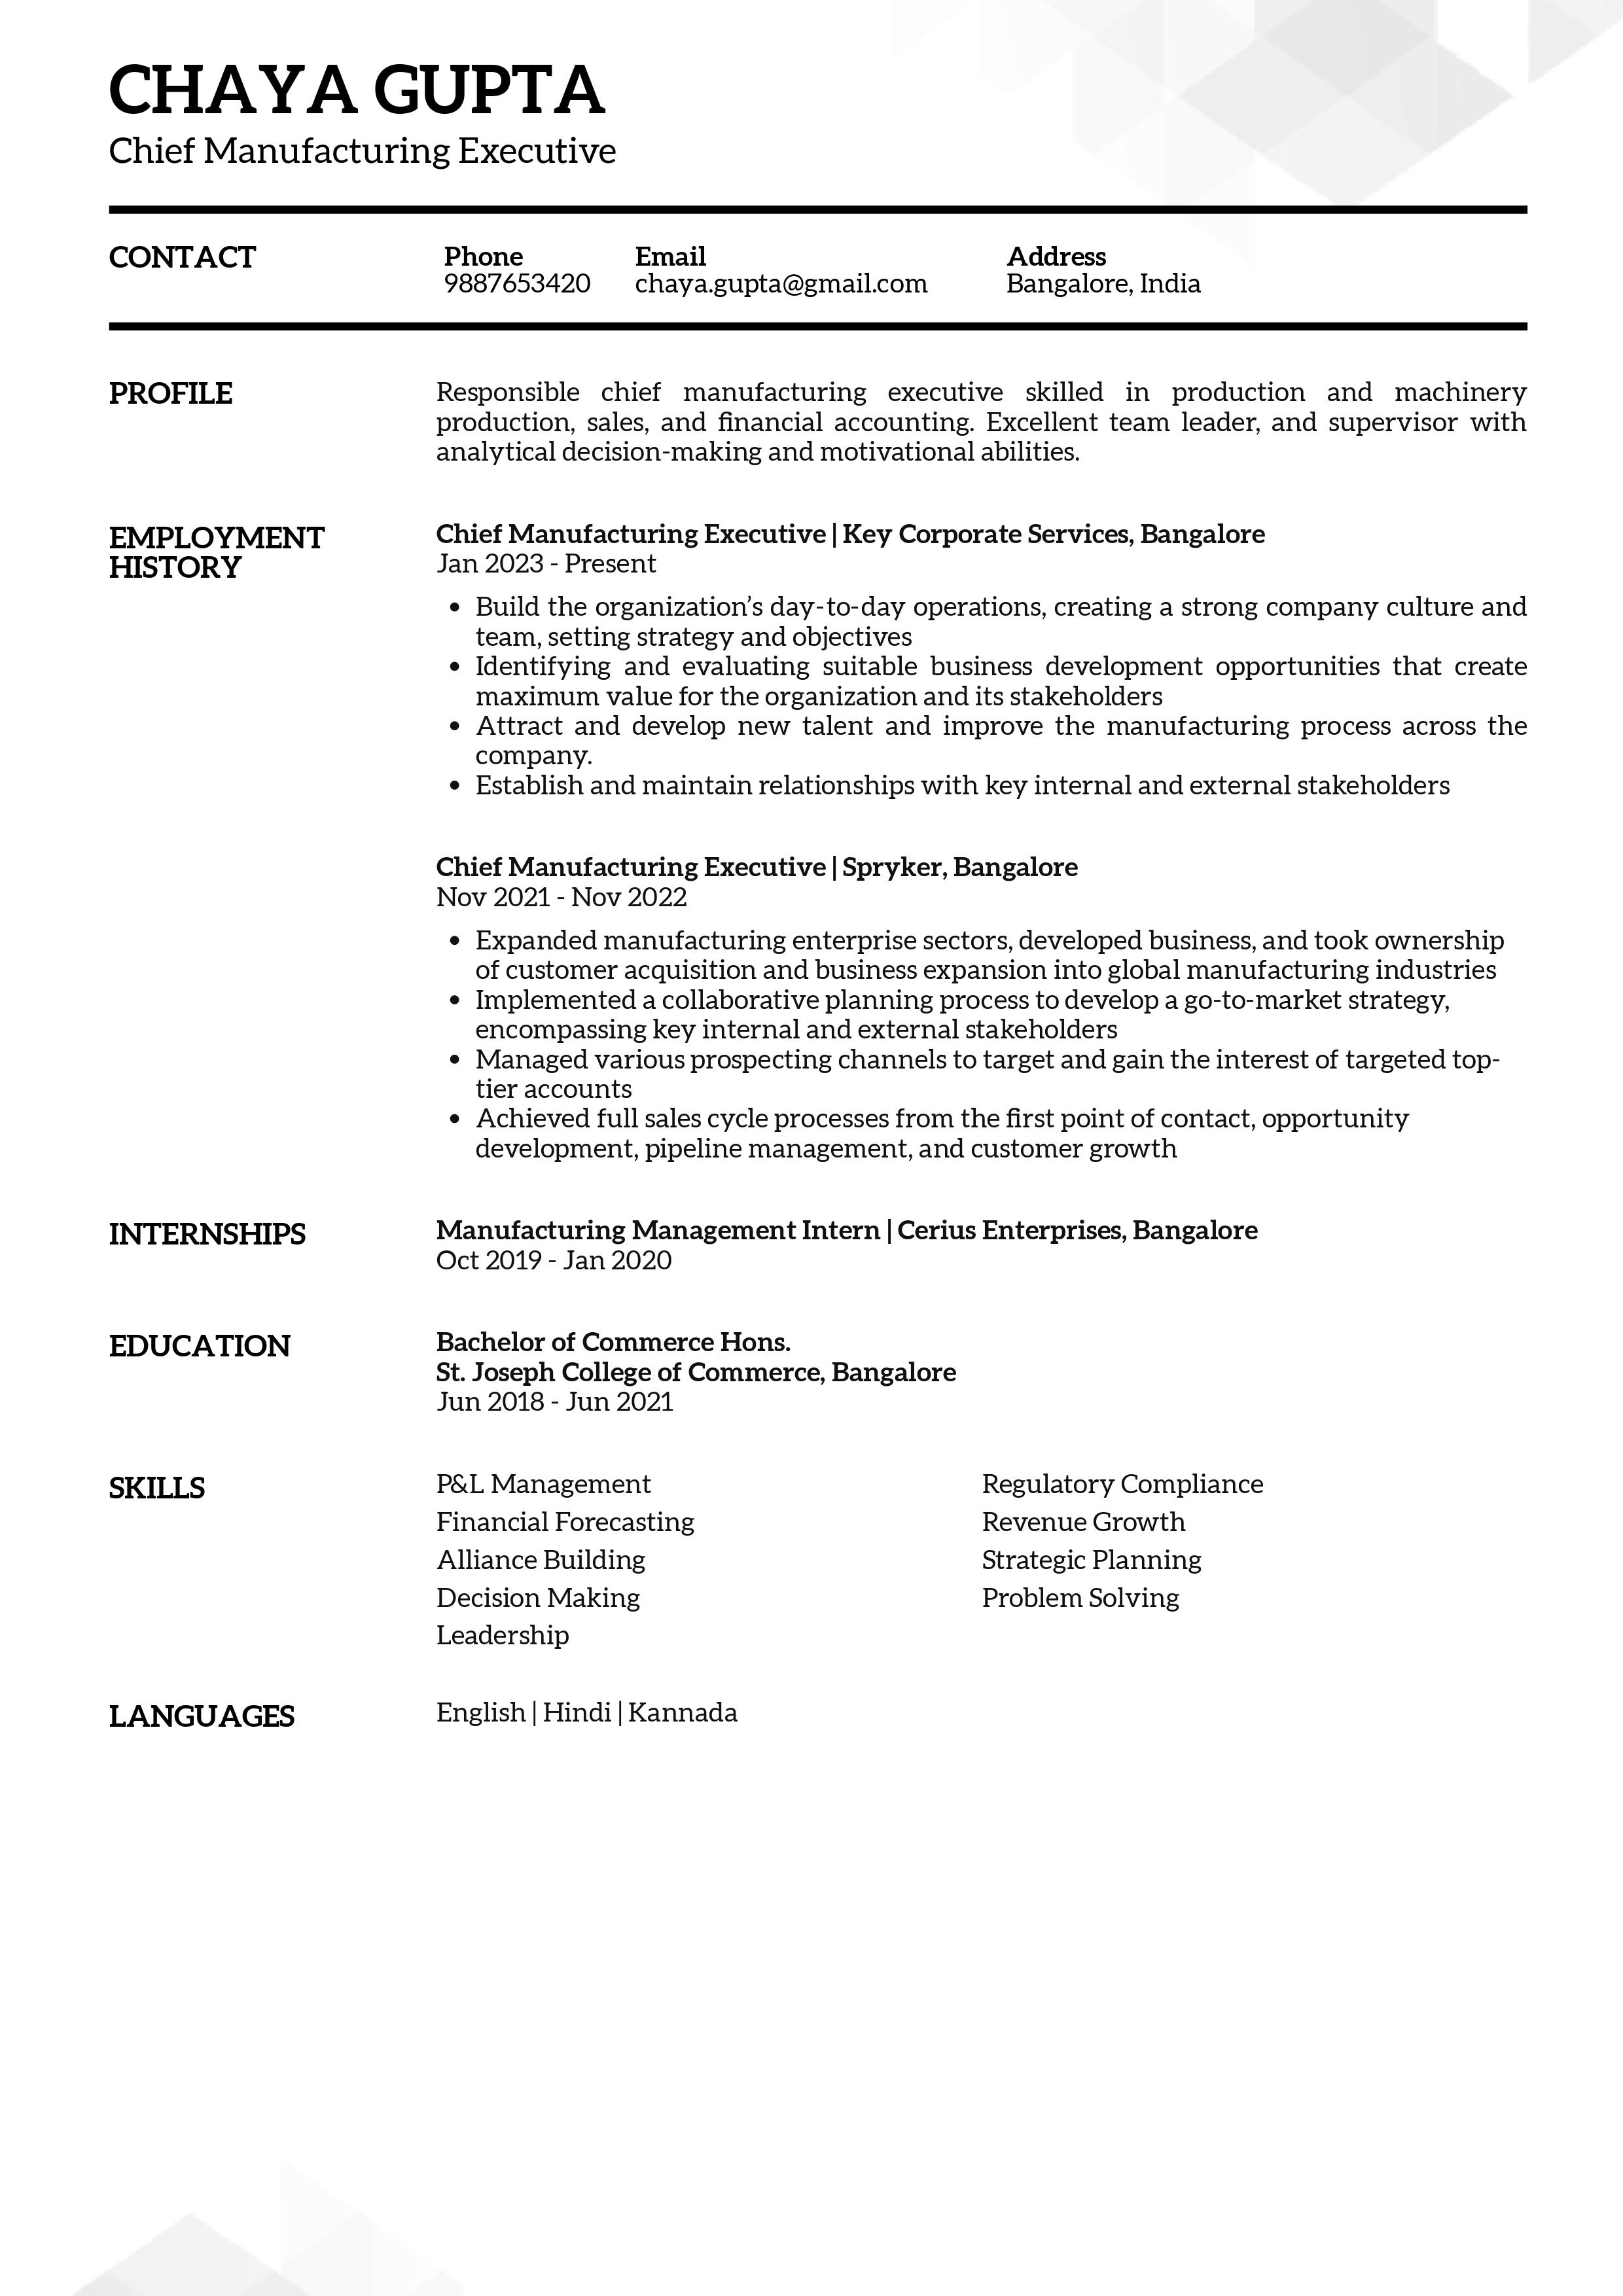 Resume of Chief Manufacturing Executive